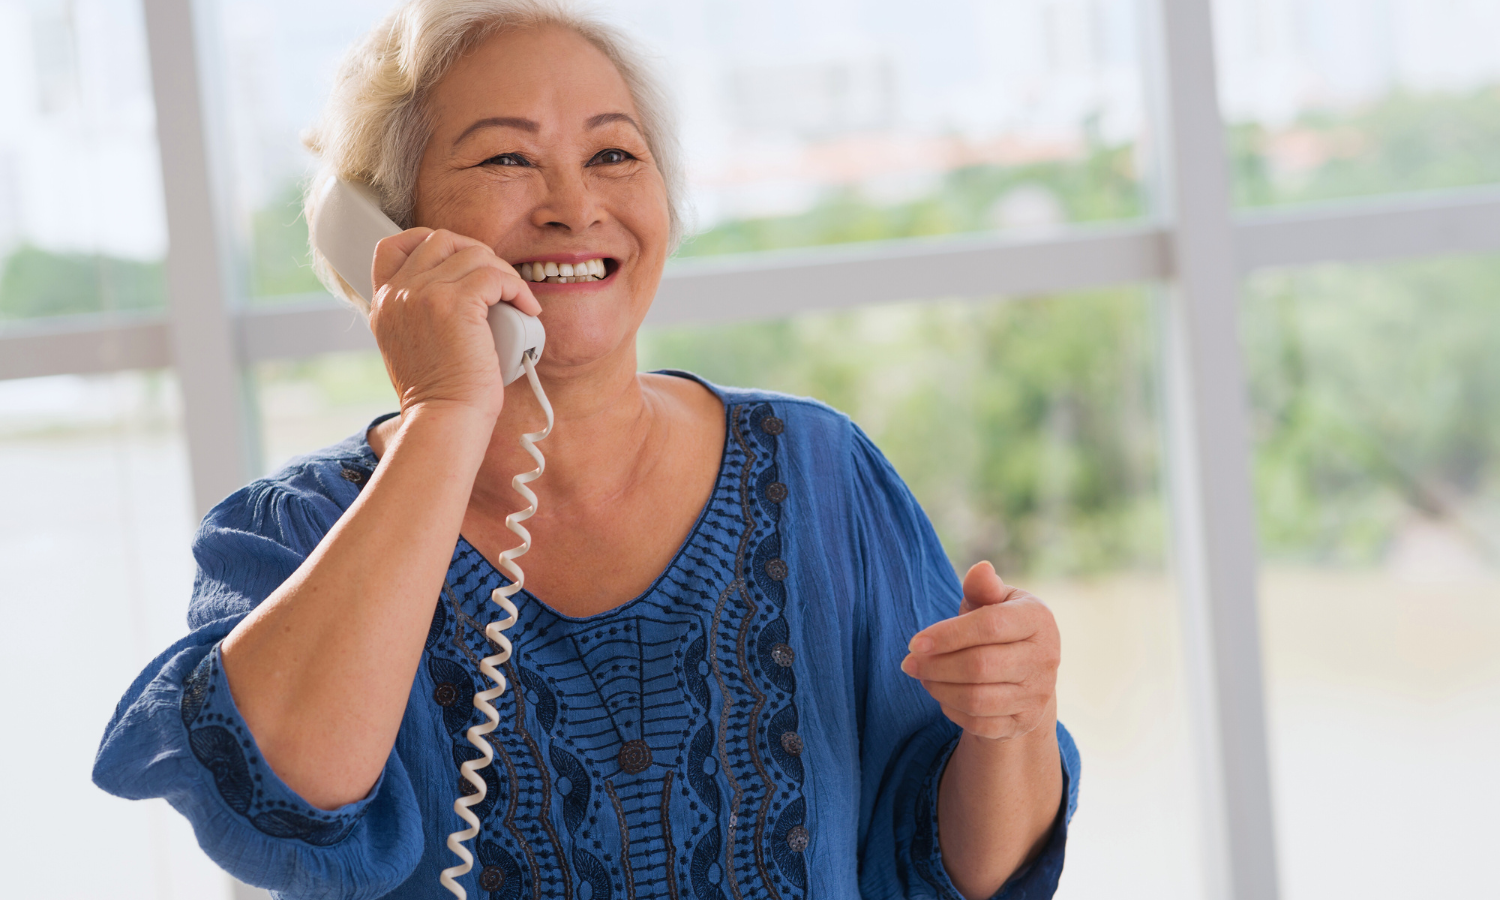 Asian woman on phone